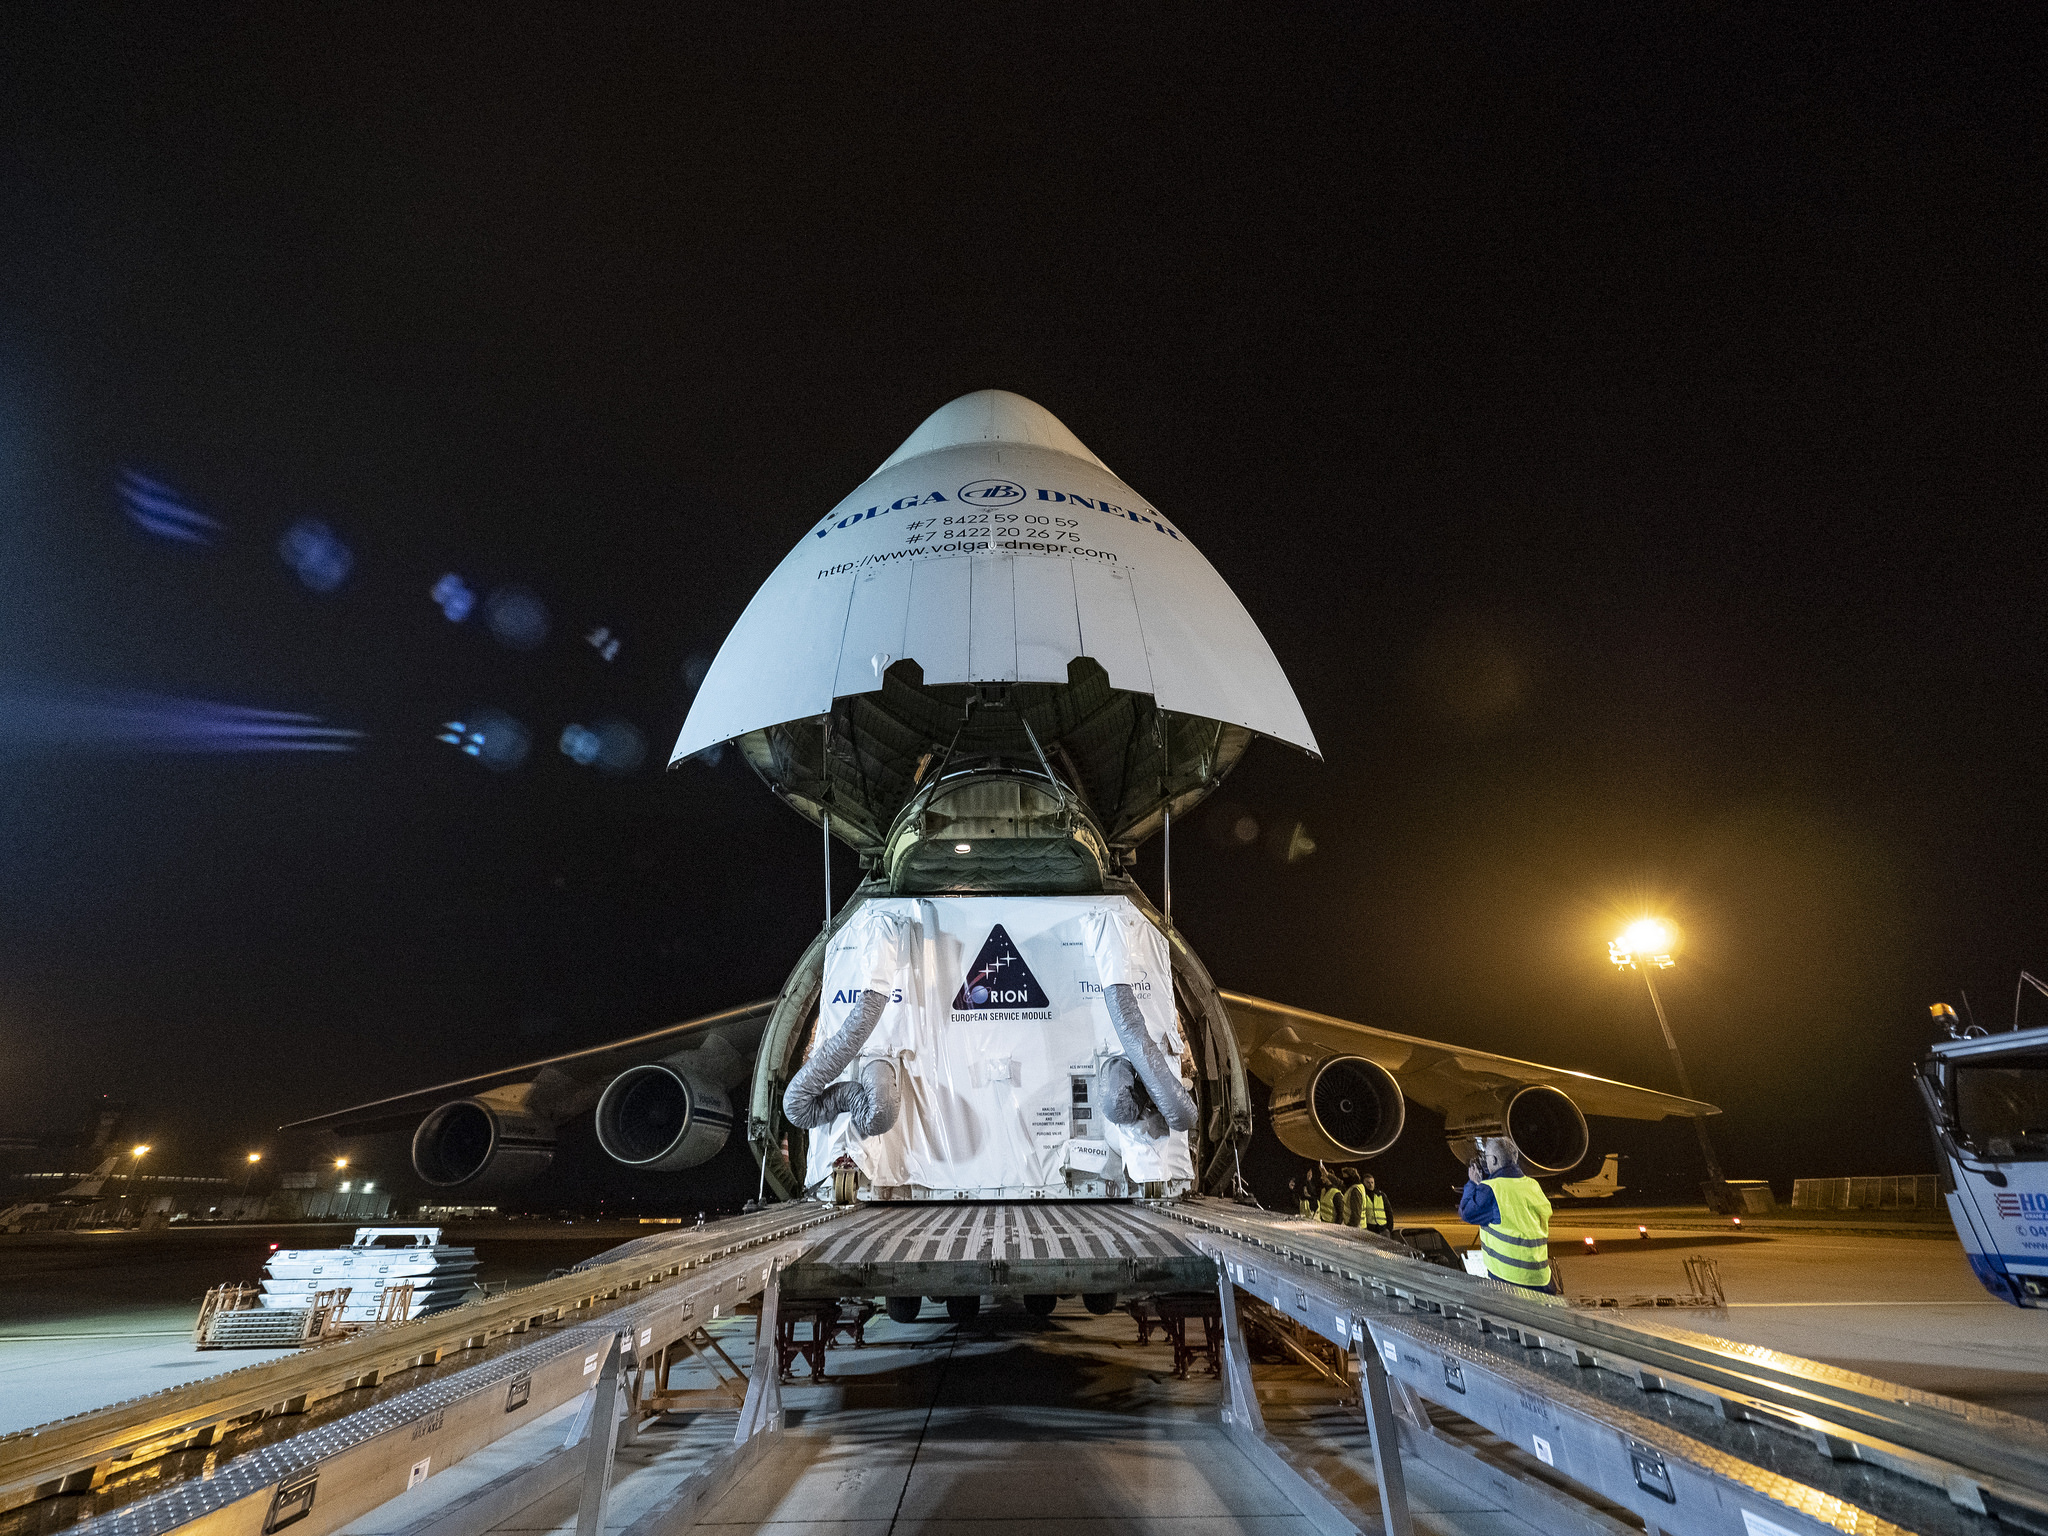 European Service Module for NASA's Orion spacecraft is loaded on an Antonov airplane in Bremen, Germany